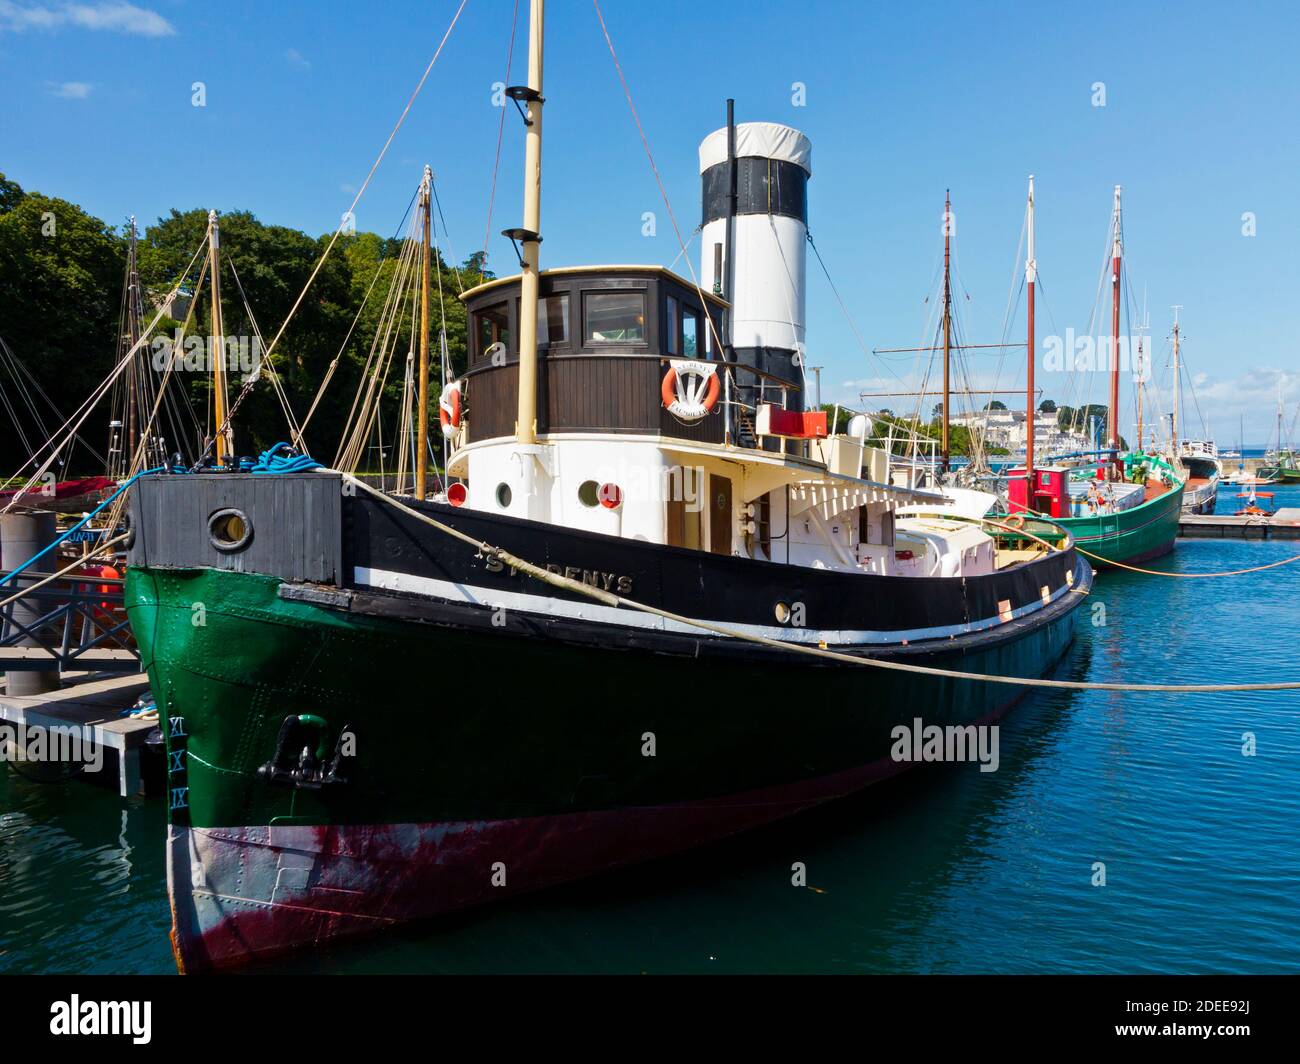 Boats in the Le Port Musee maritime museum in the harbour at Port Rhu in  Douarnenez Finisterre Brittany north west France Stock Photo - Alamy